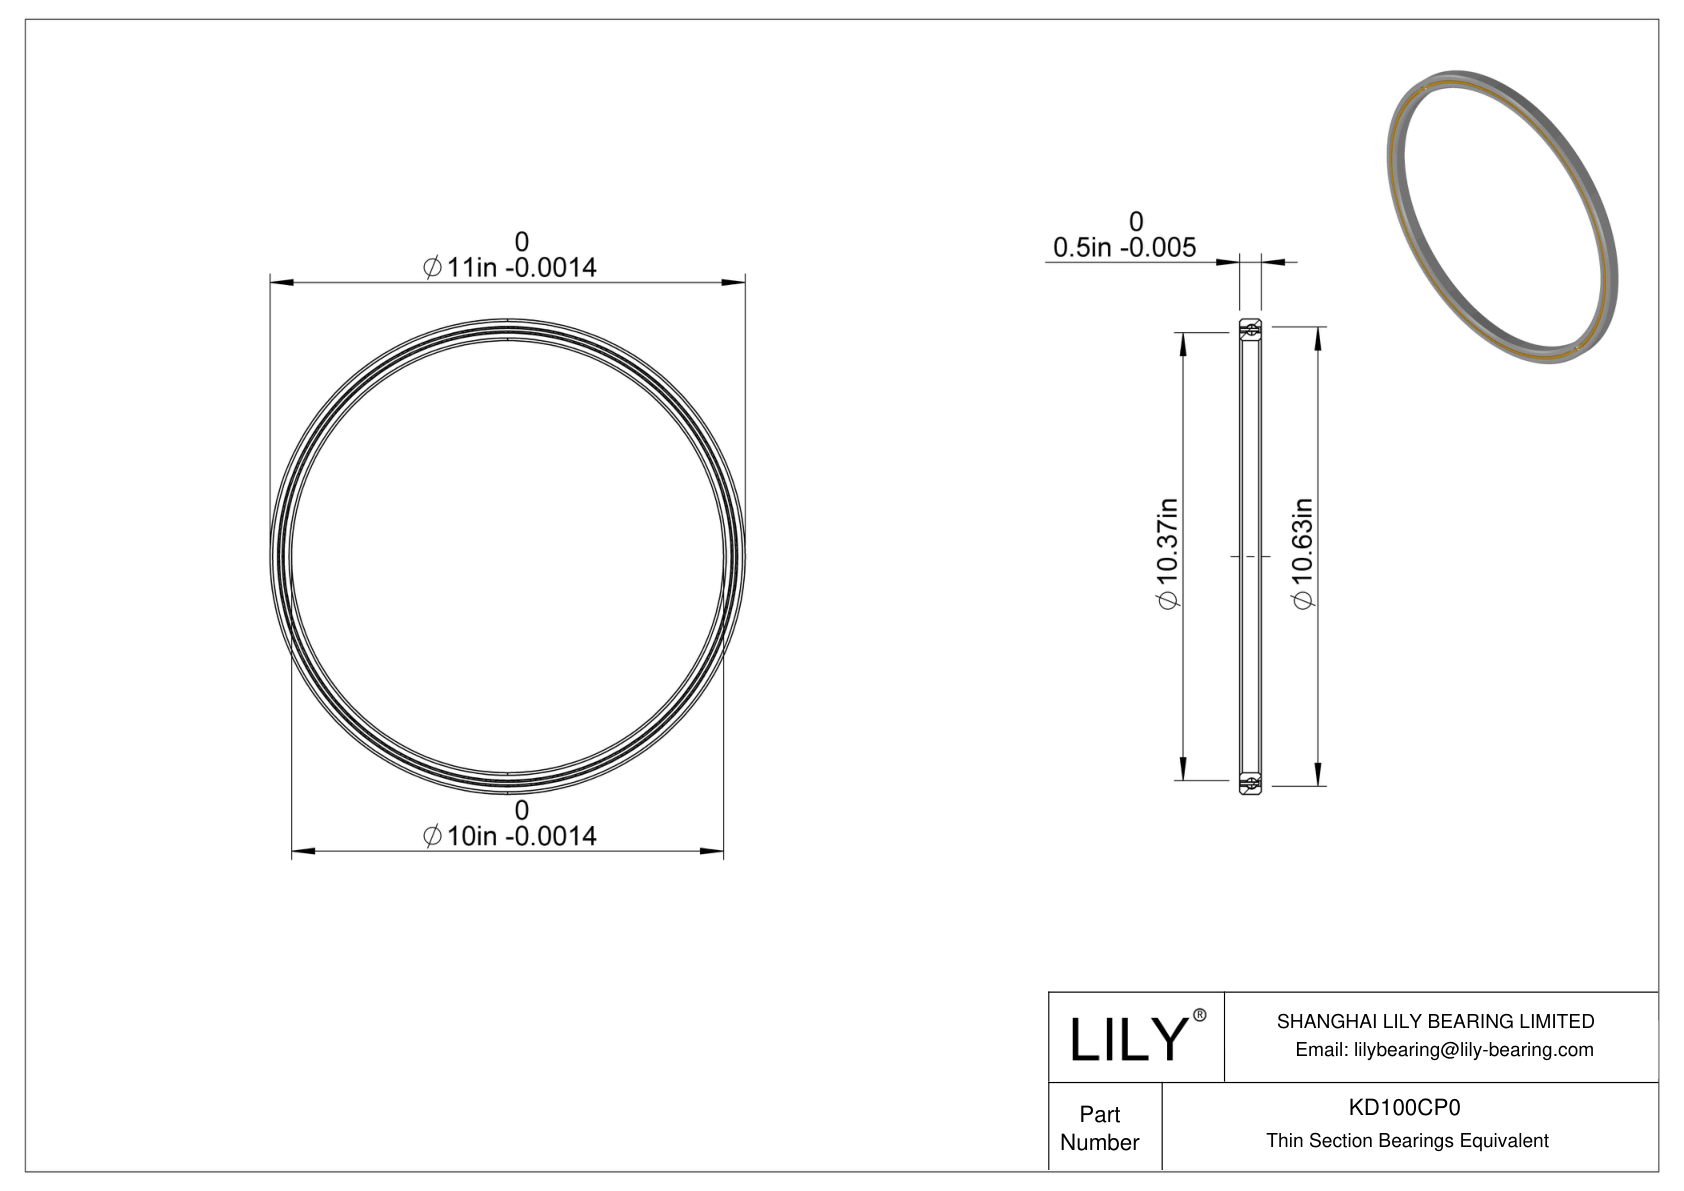 KD100CP0 Constant Section (CS) Bearings cad drawing